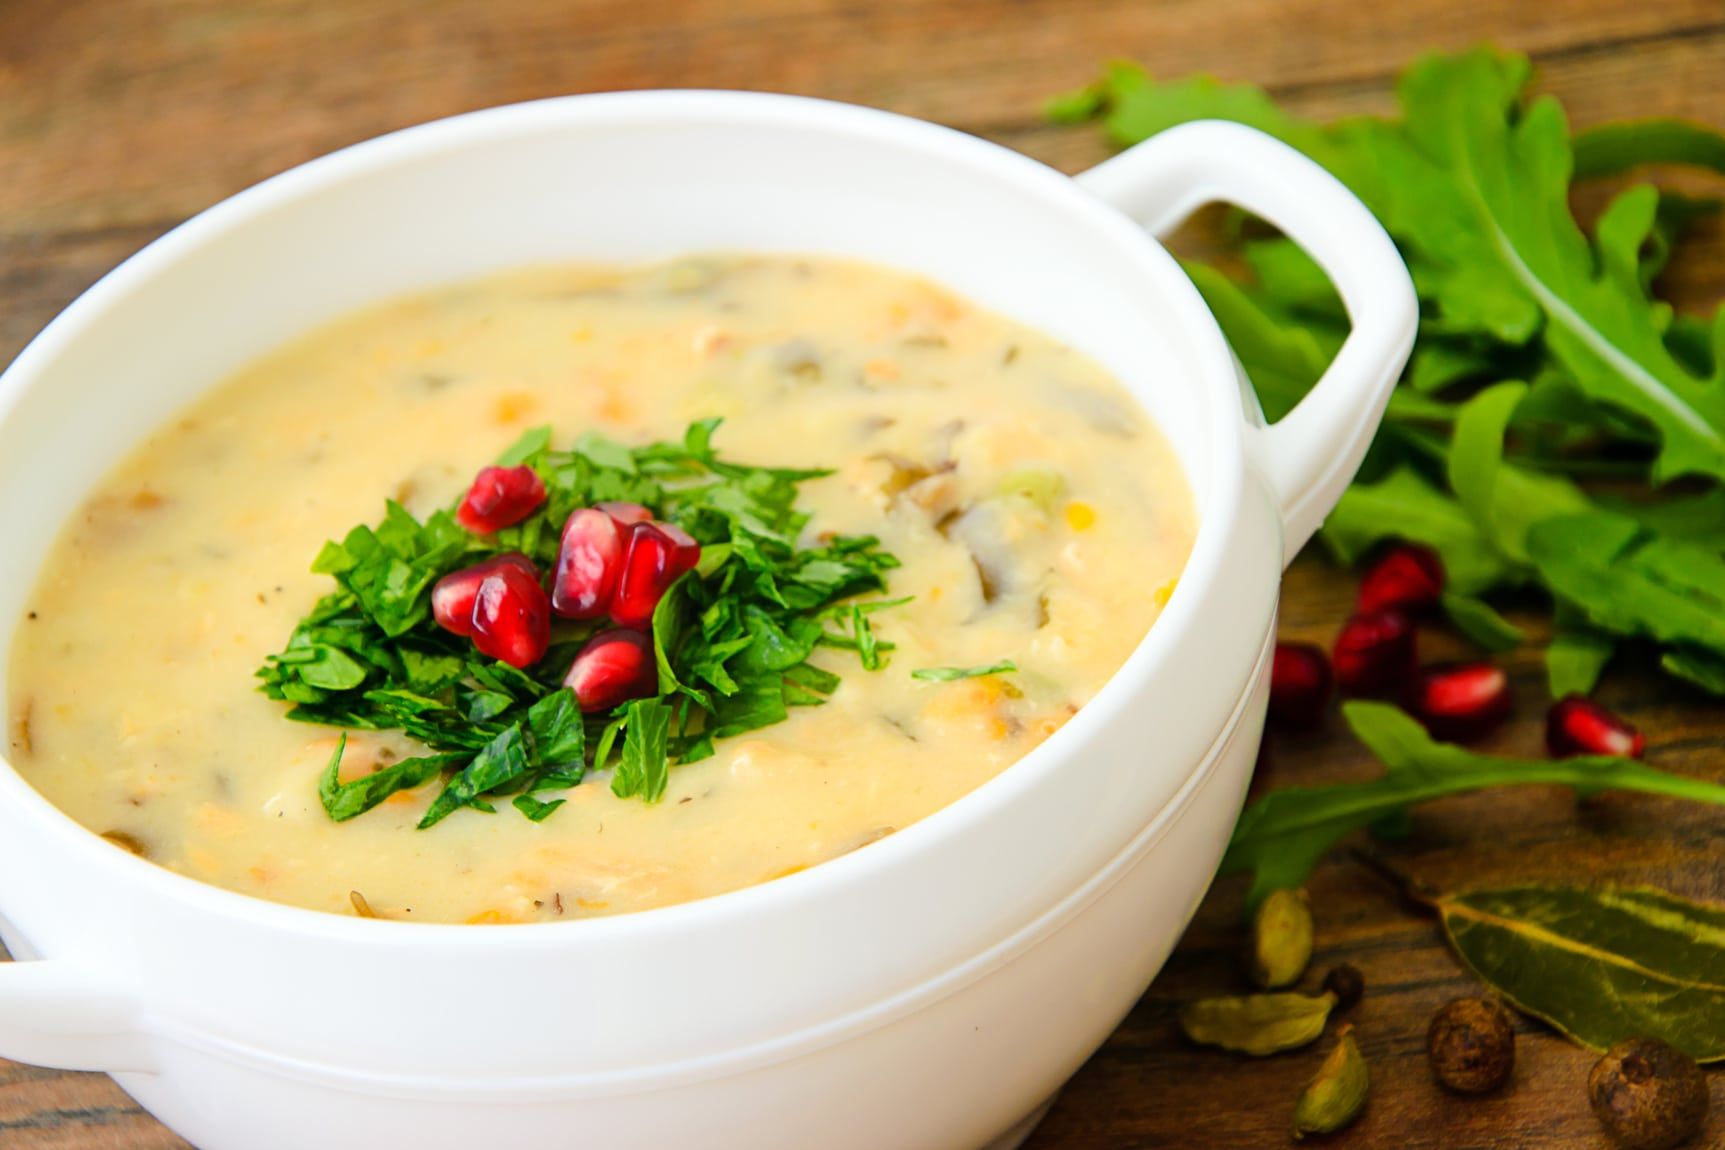 Healthy and Diet Food: Soup of Chowder with Pomegranate. Studio Photo